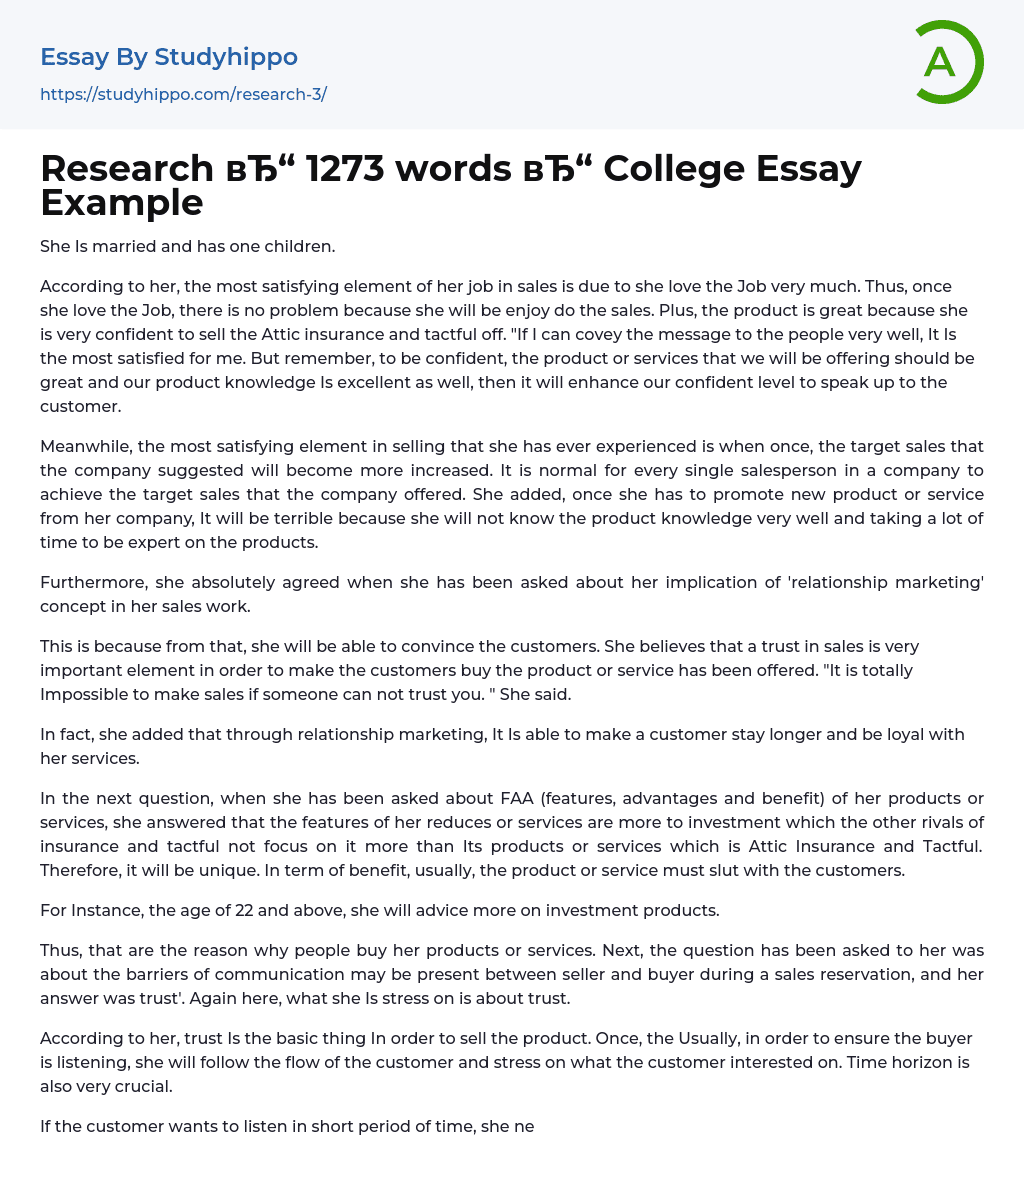 Research 1273 words College Essay Example